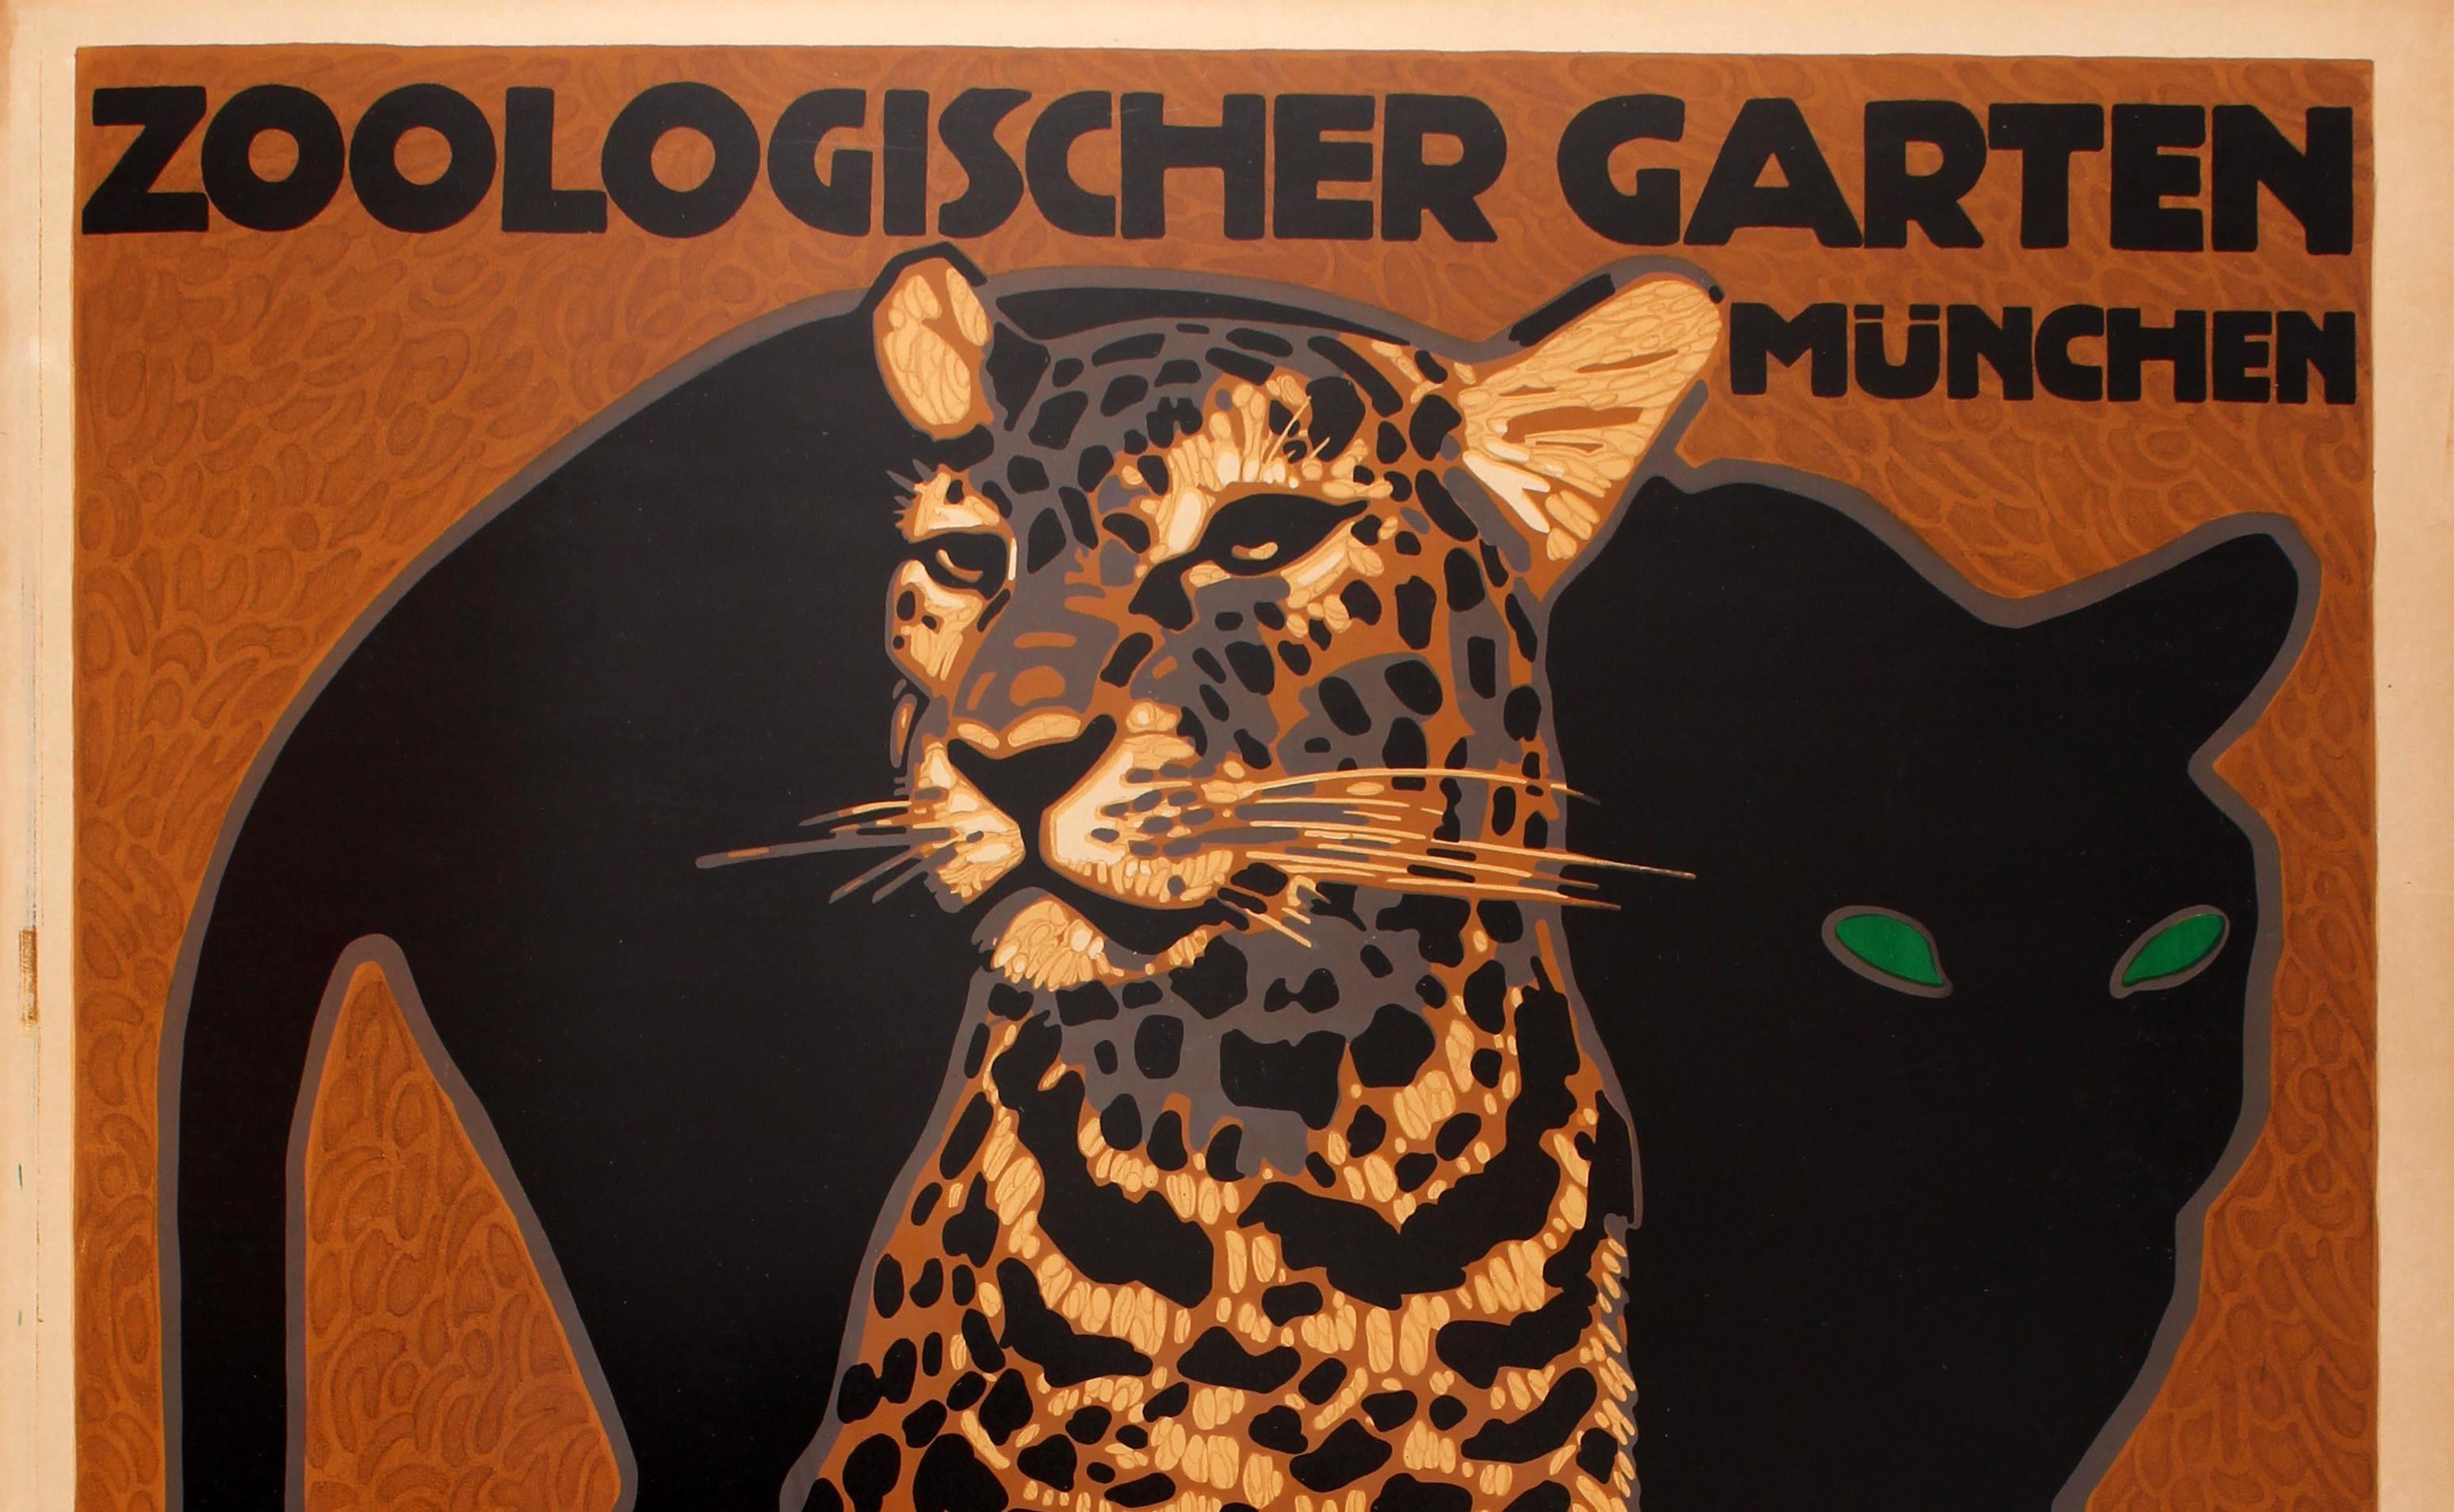 Original vintage travel advertising poster for Munich Zoo Park / Zoologischer Garten Munchen by the notable German graphic artist Ludwig Hohlwein (1874-1949). Stunning artwork featuring a black panther with green eyes behind a leopard sitting